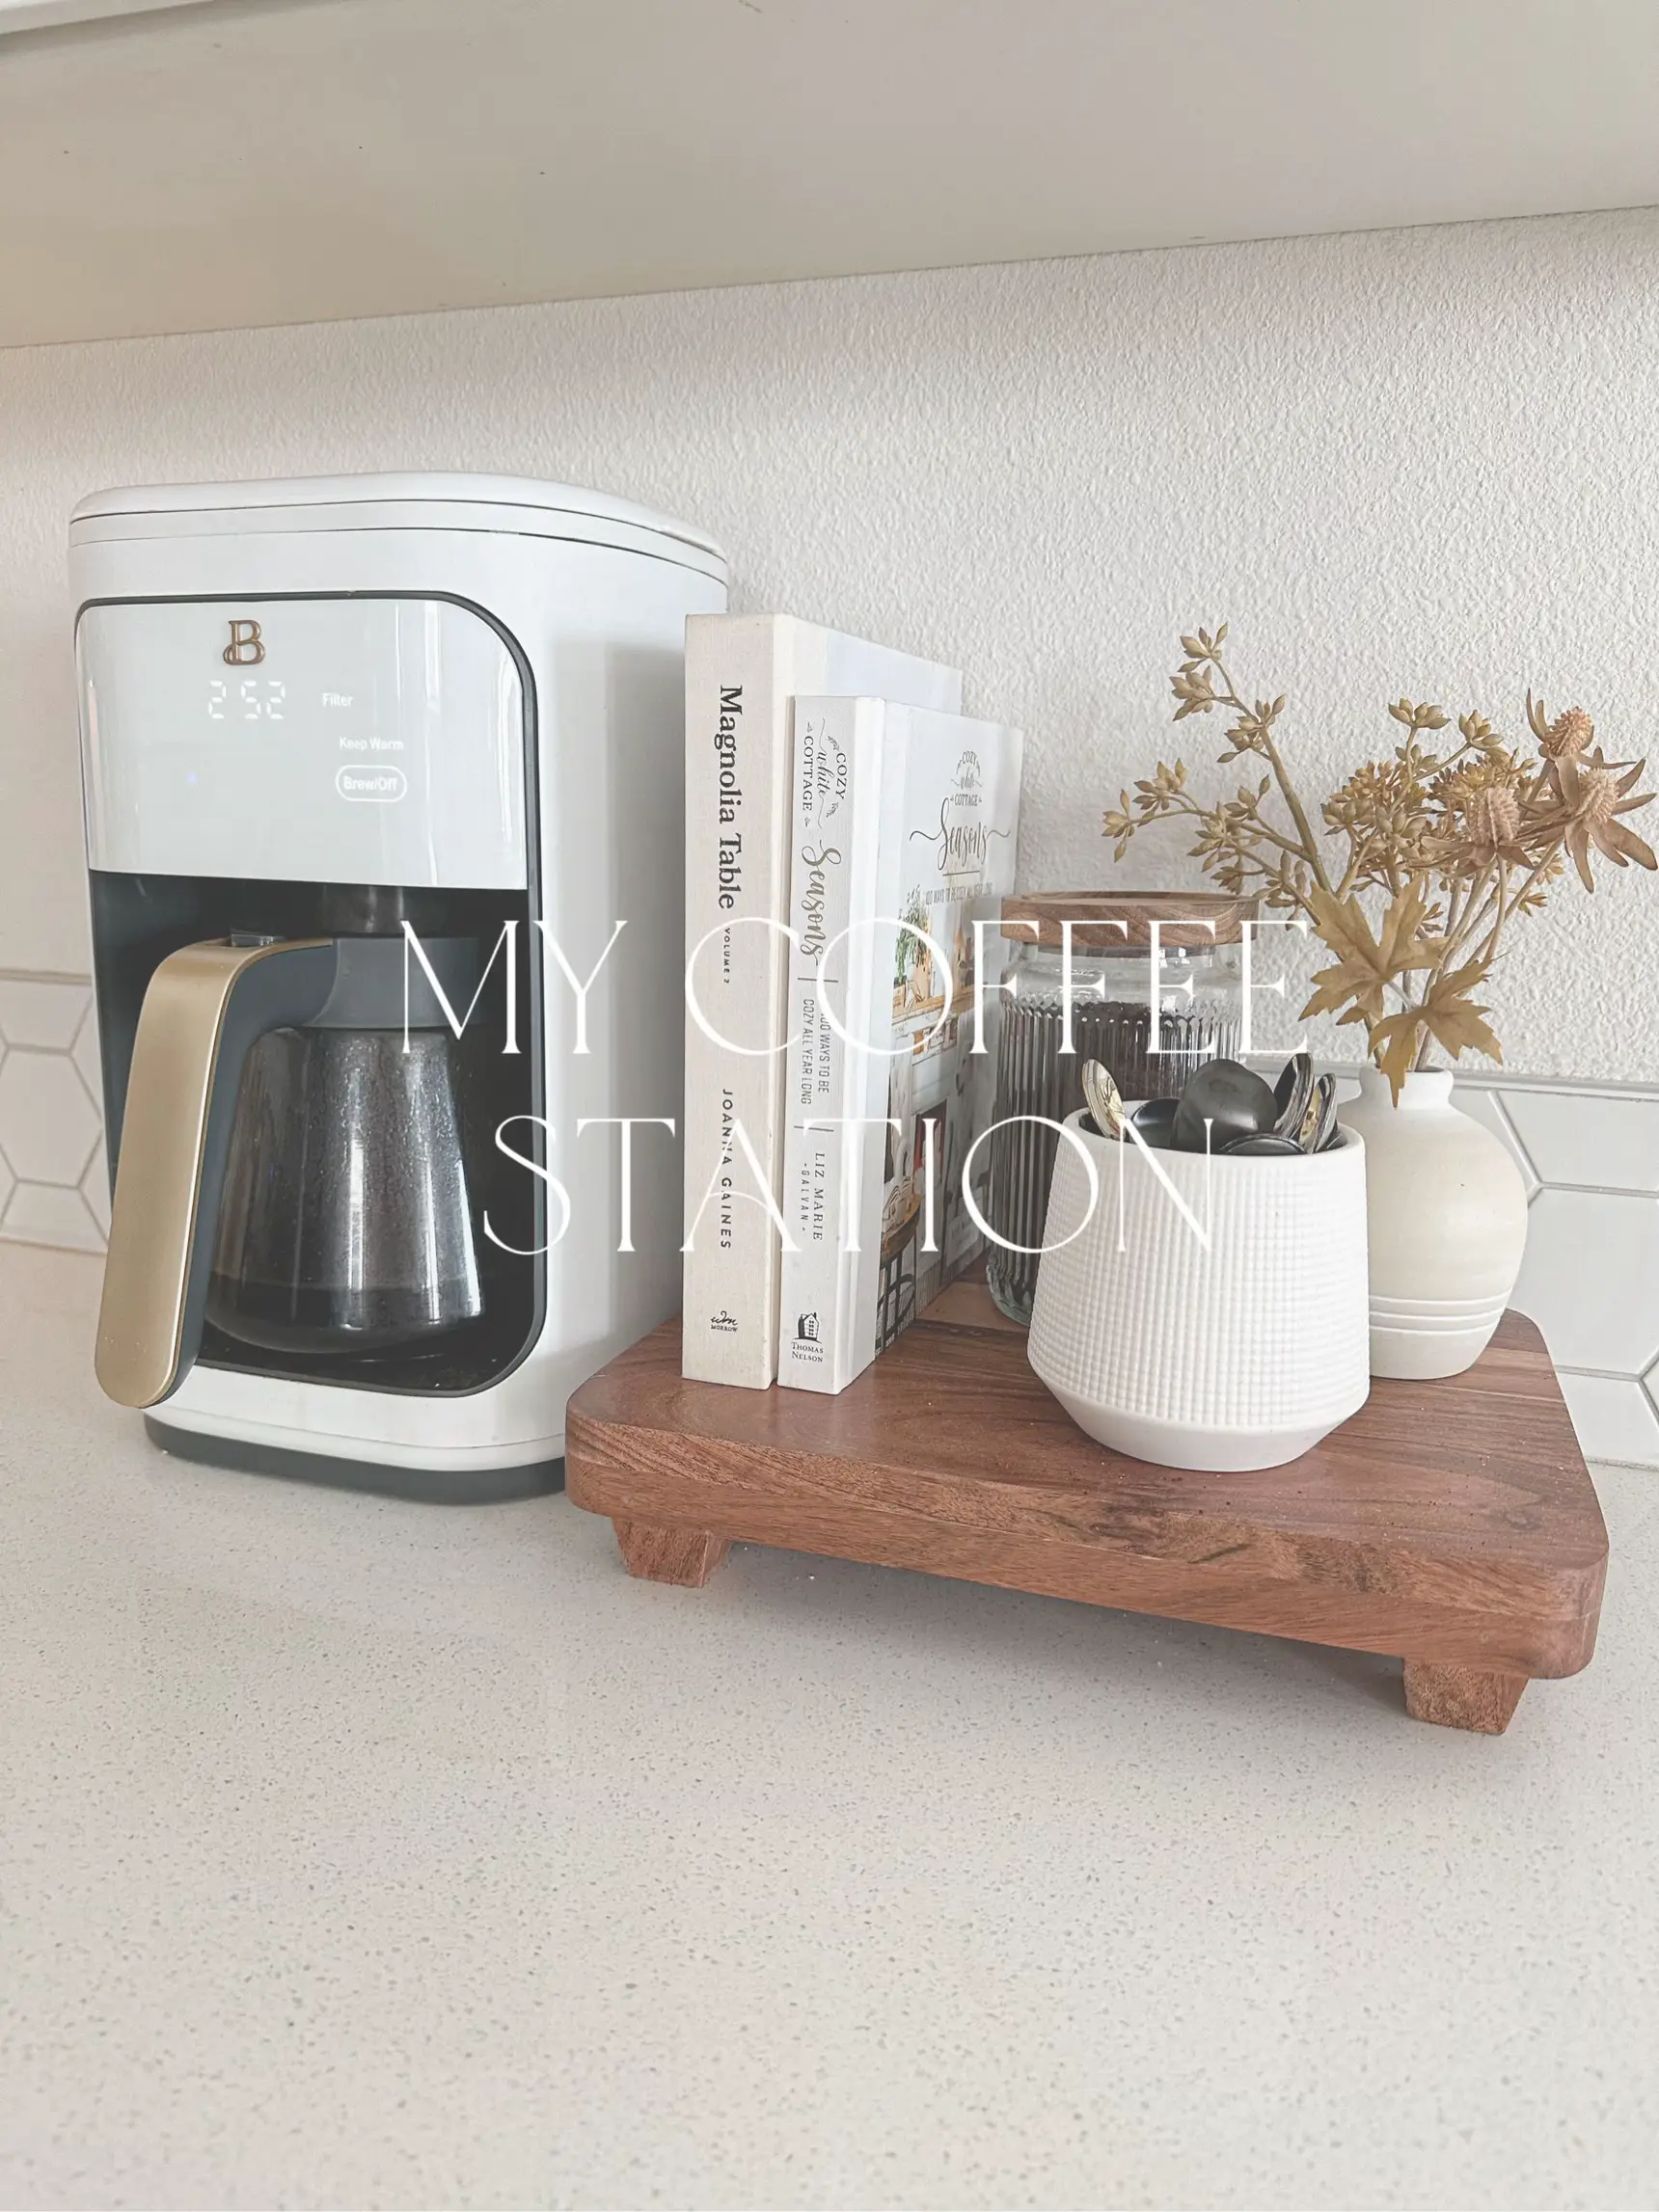 Coffee station MUST-HAVES! No coffee bar? No prob!, Gallery posted by  thewassonway